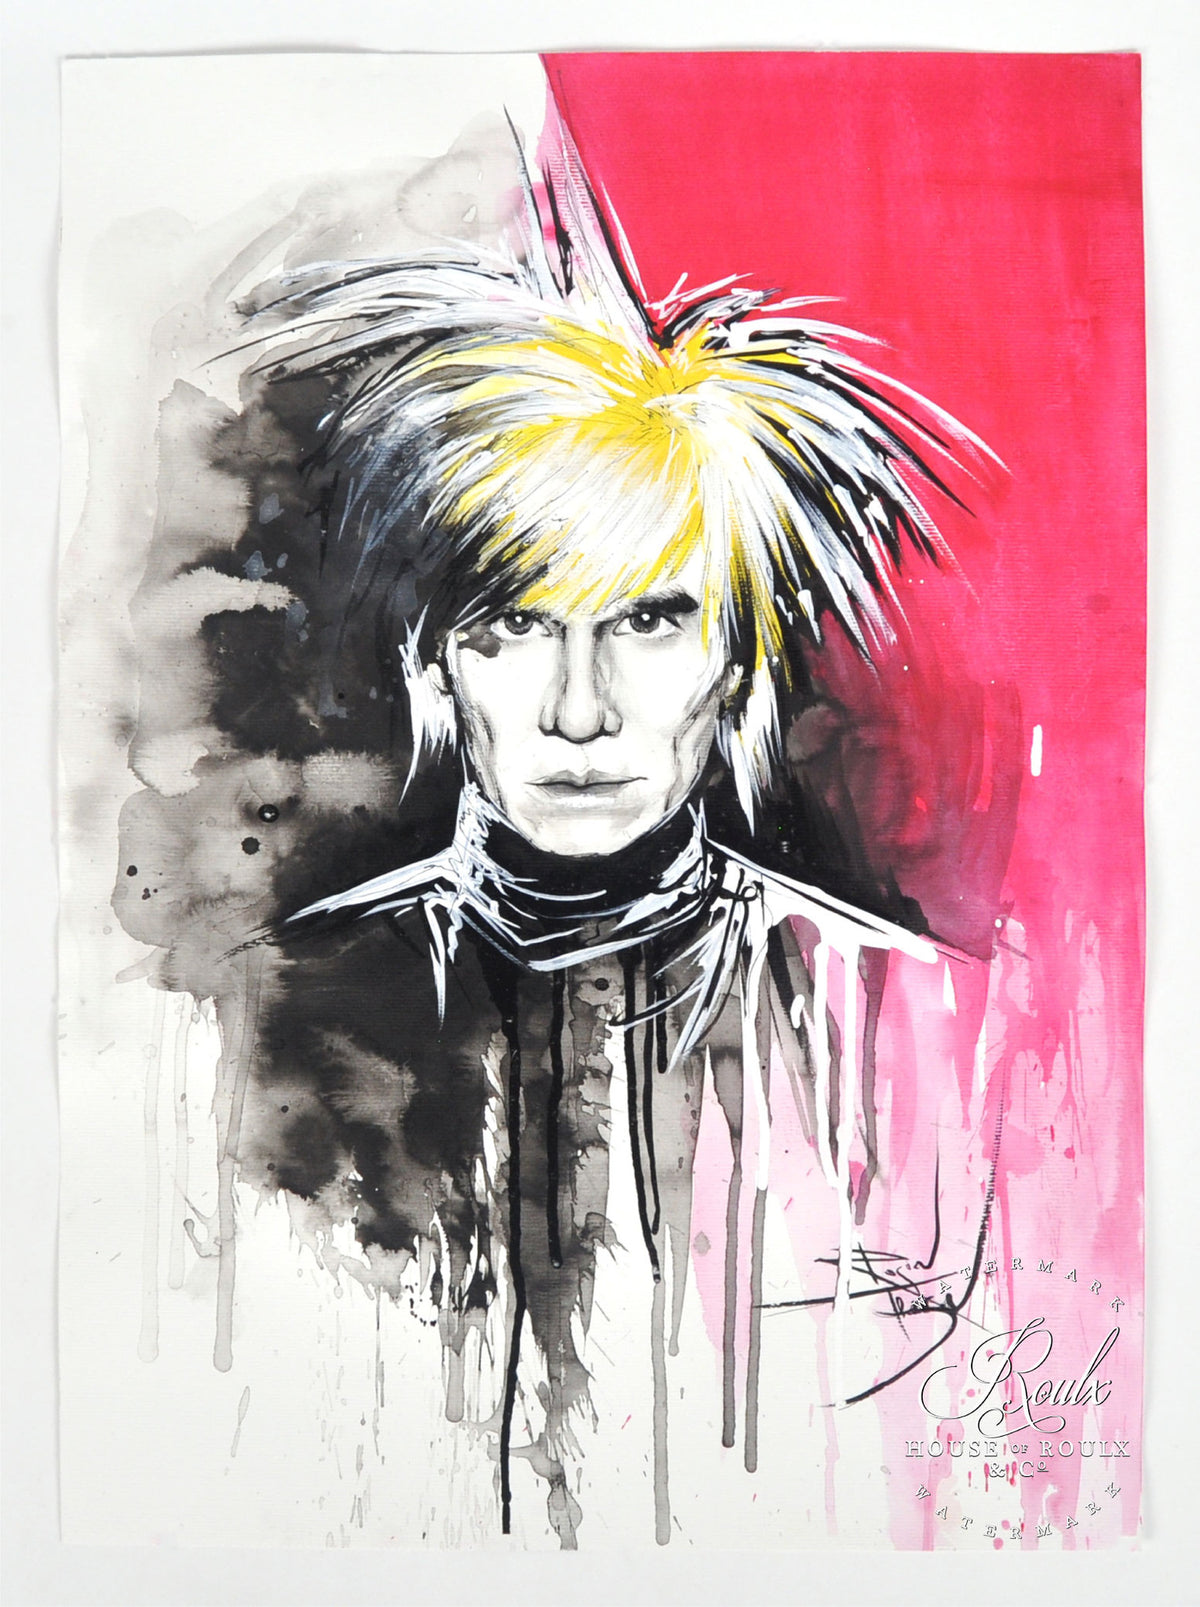 Therése Rosier &quot;Andy Warhol&quot; - Original Watercolor Painting